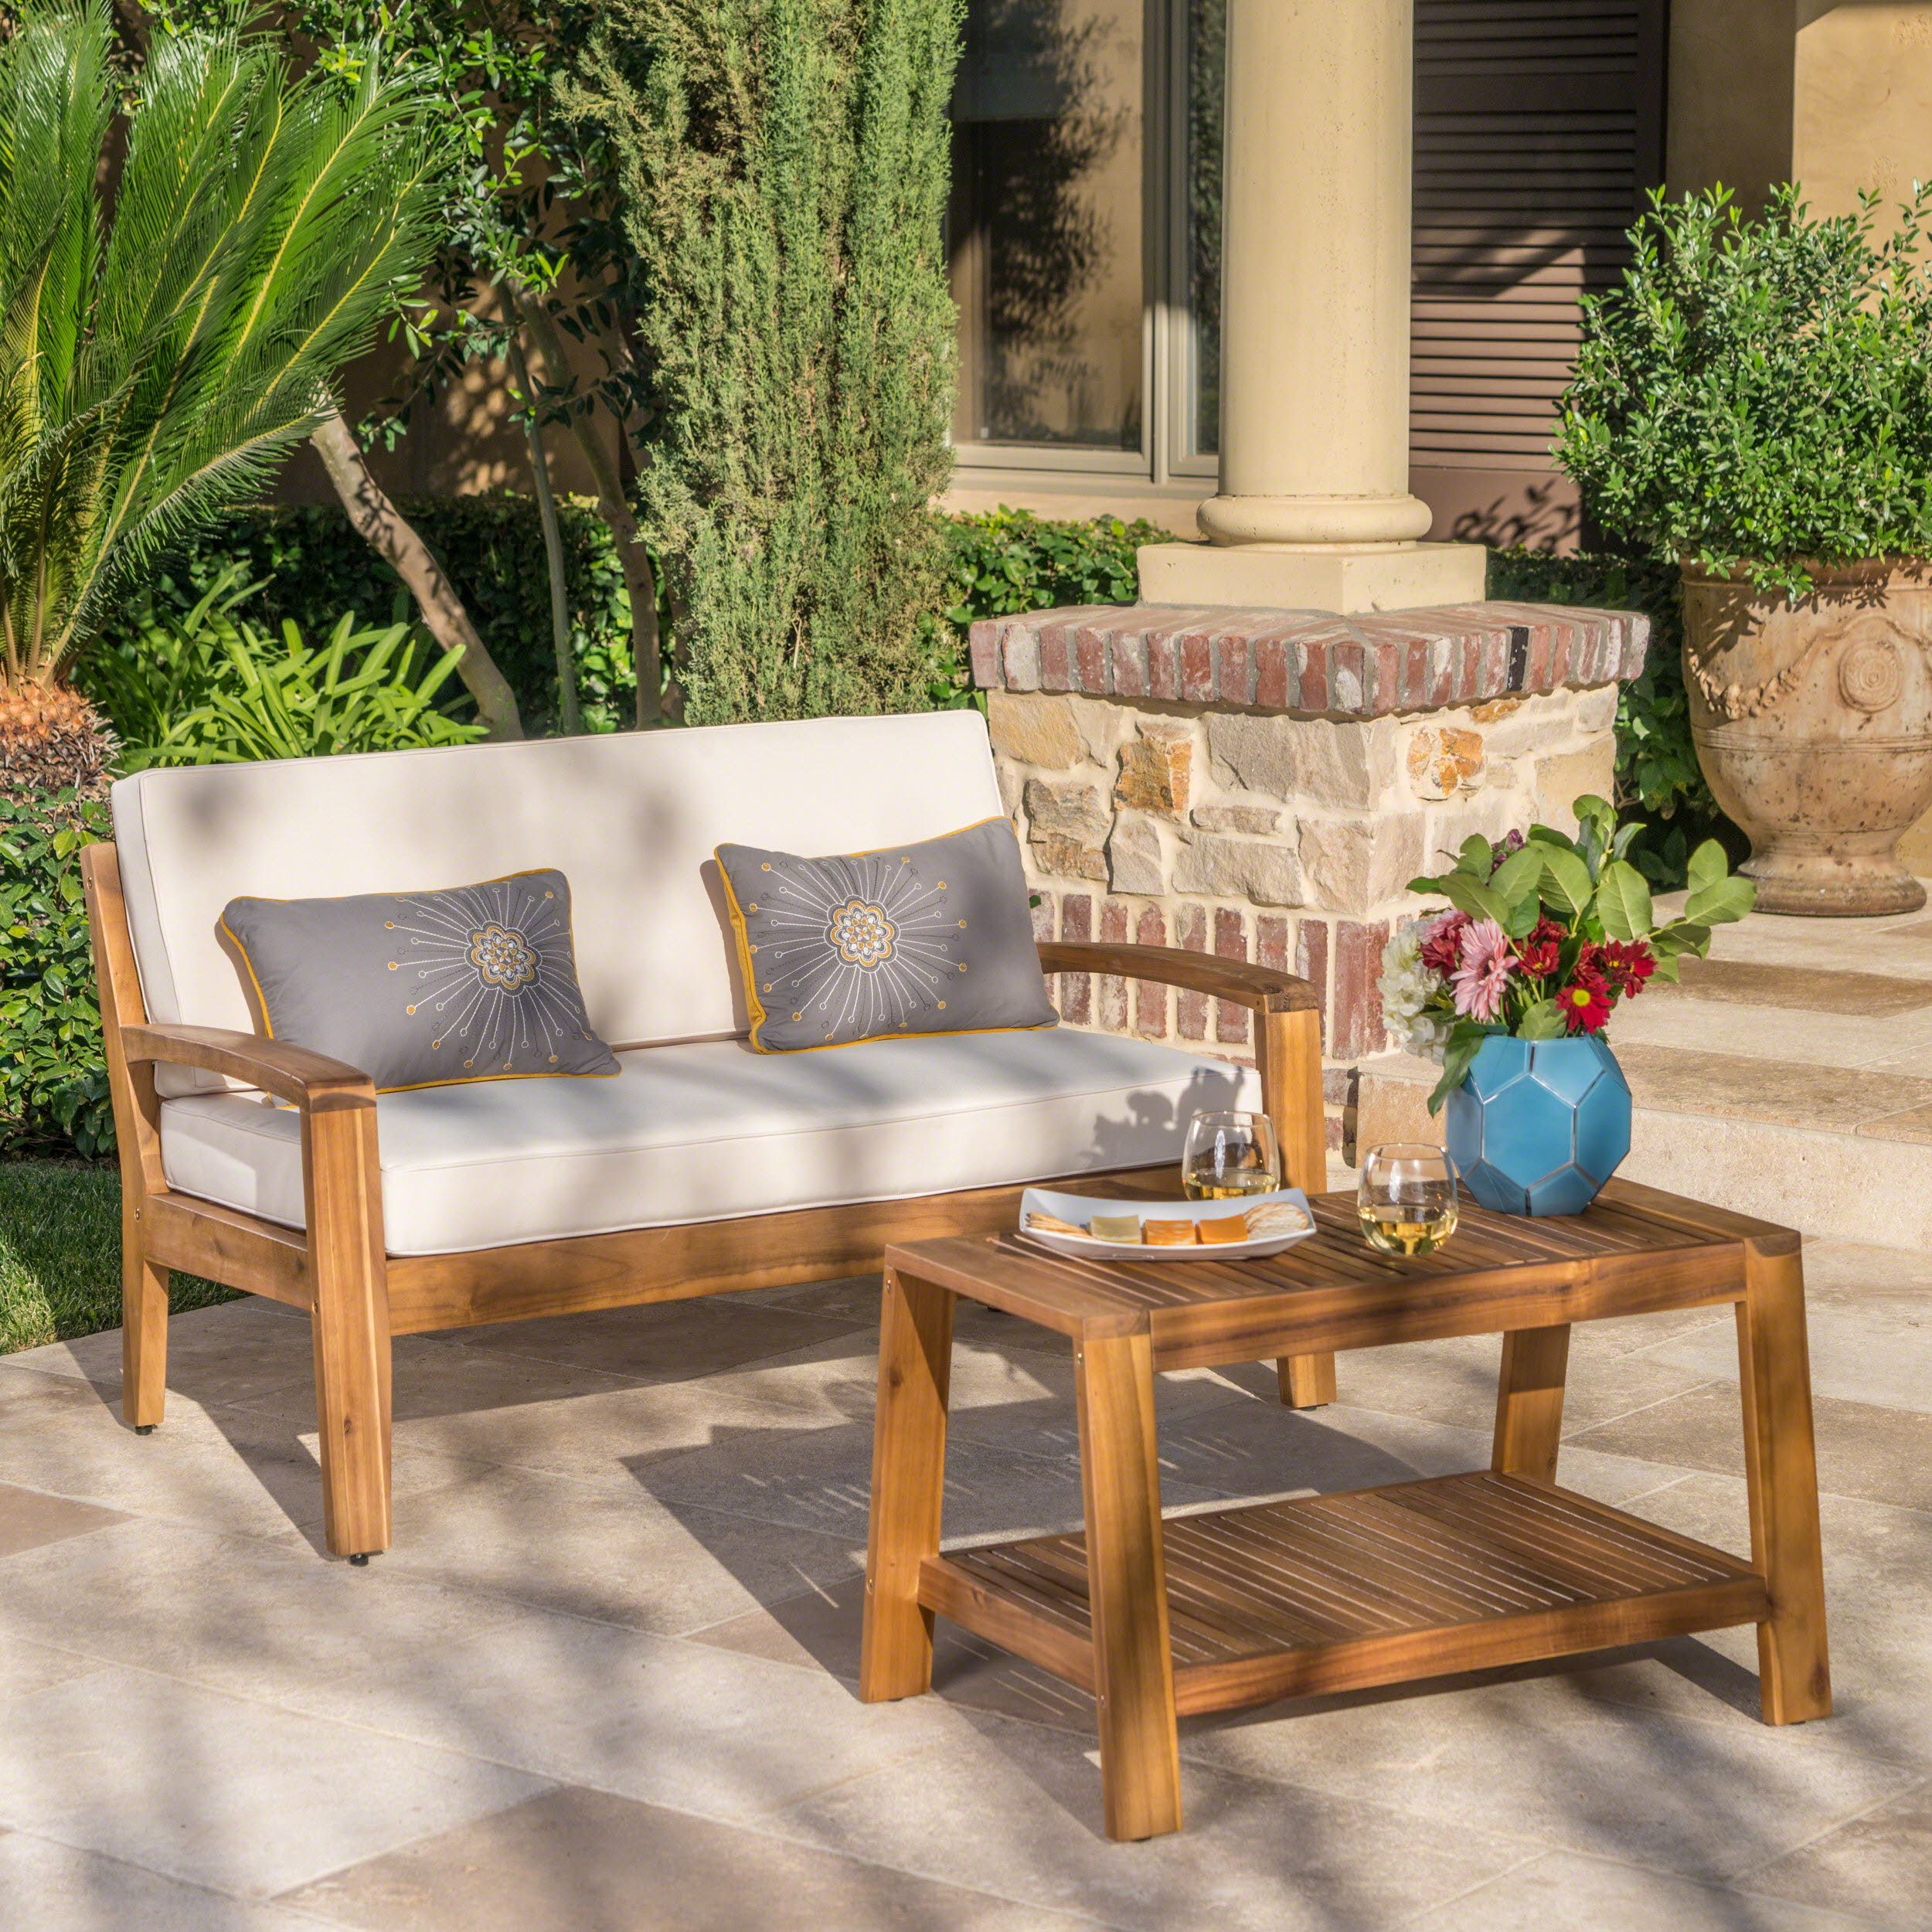 Christian Outdoor Acacia Wood Loveseat And Coffee Table In Ecru And Otter Coffee Tables (View 15 of 15)